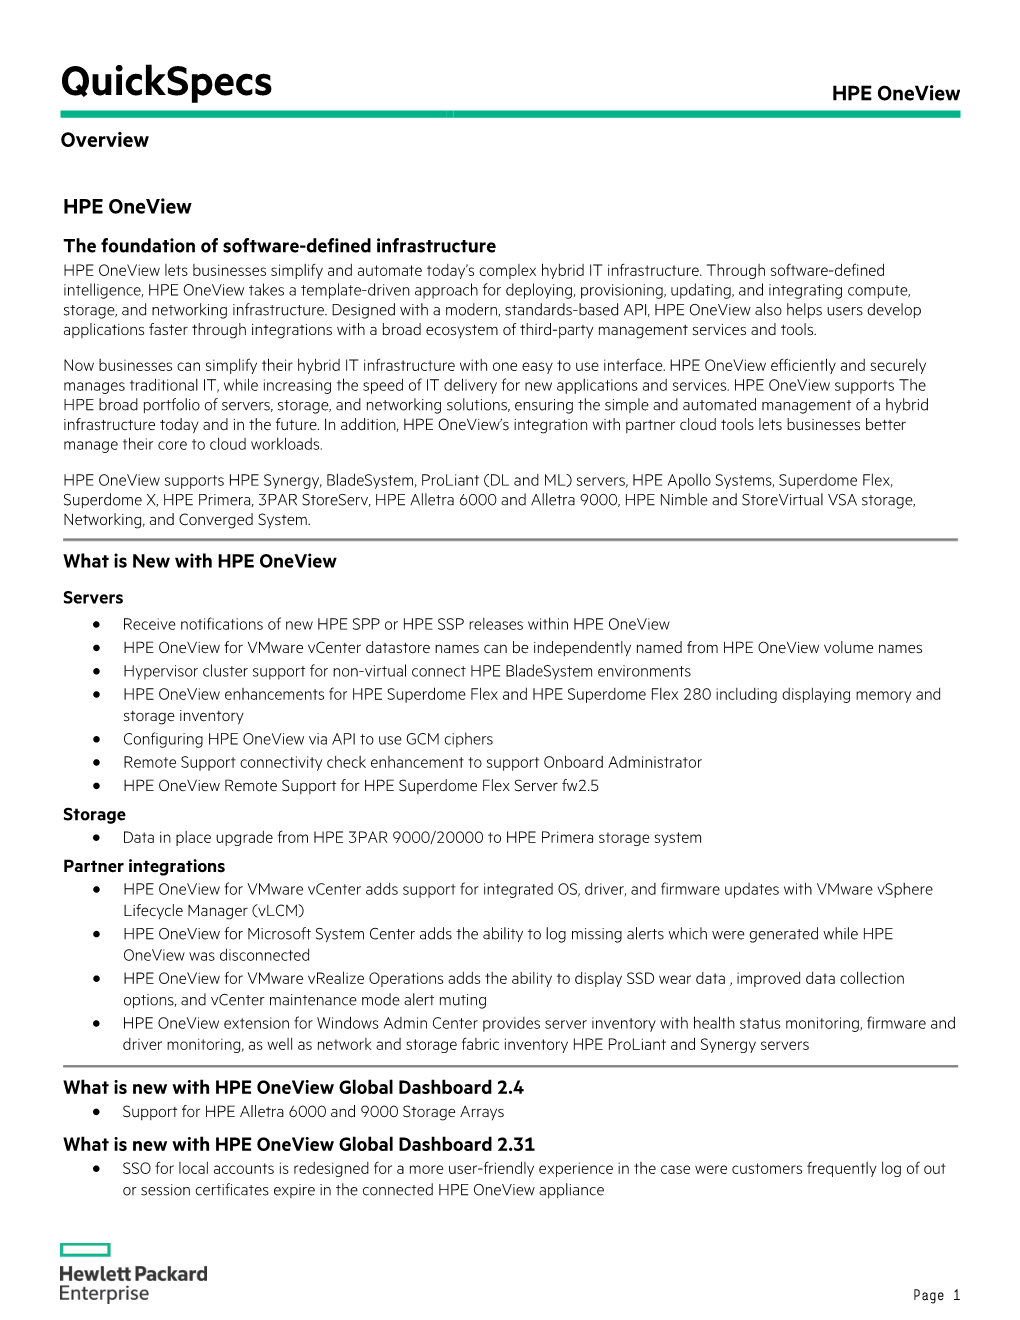 HPE Oneview Overview